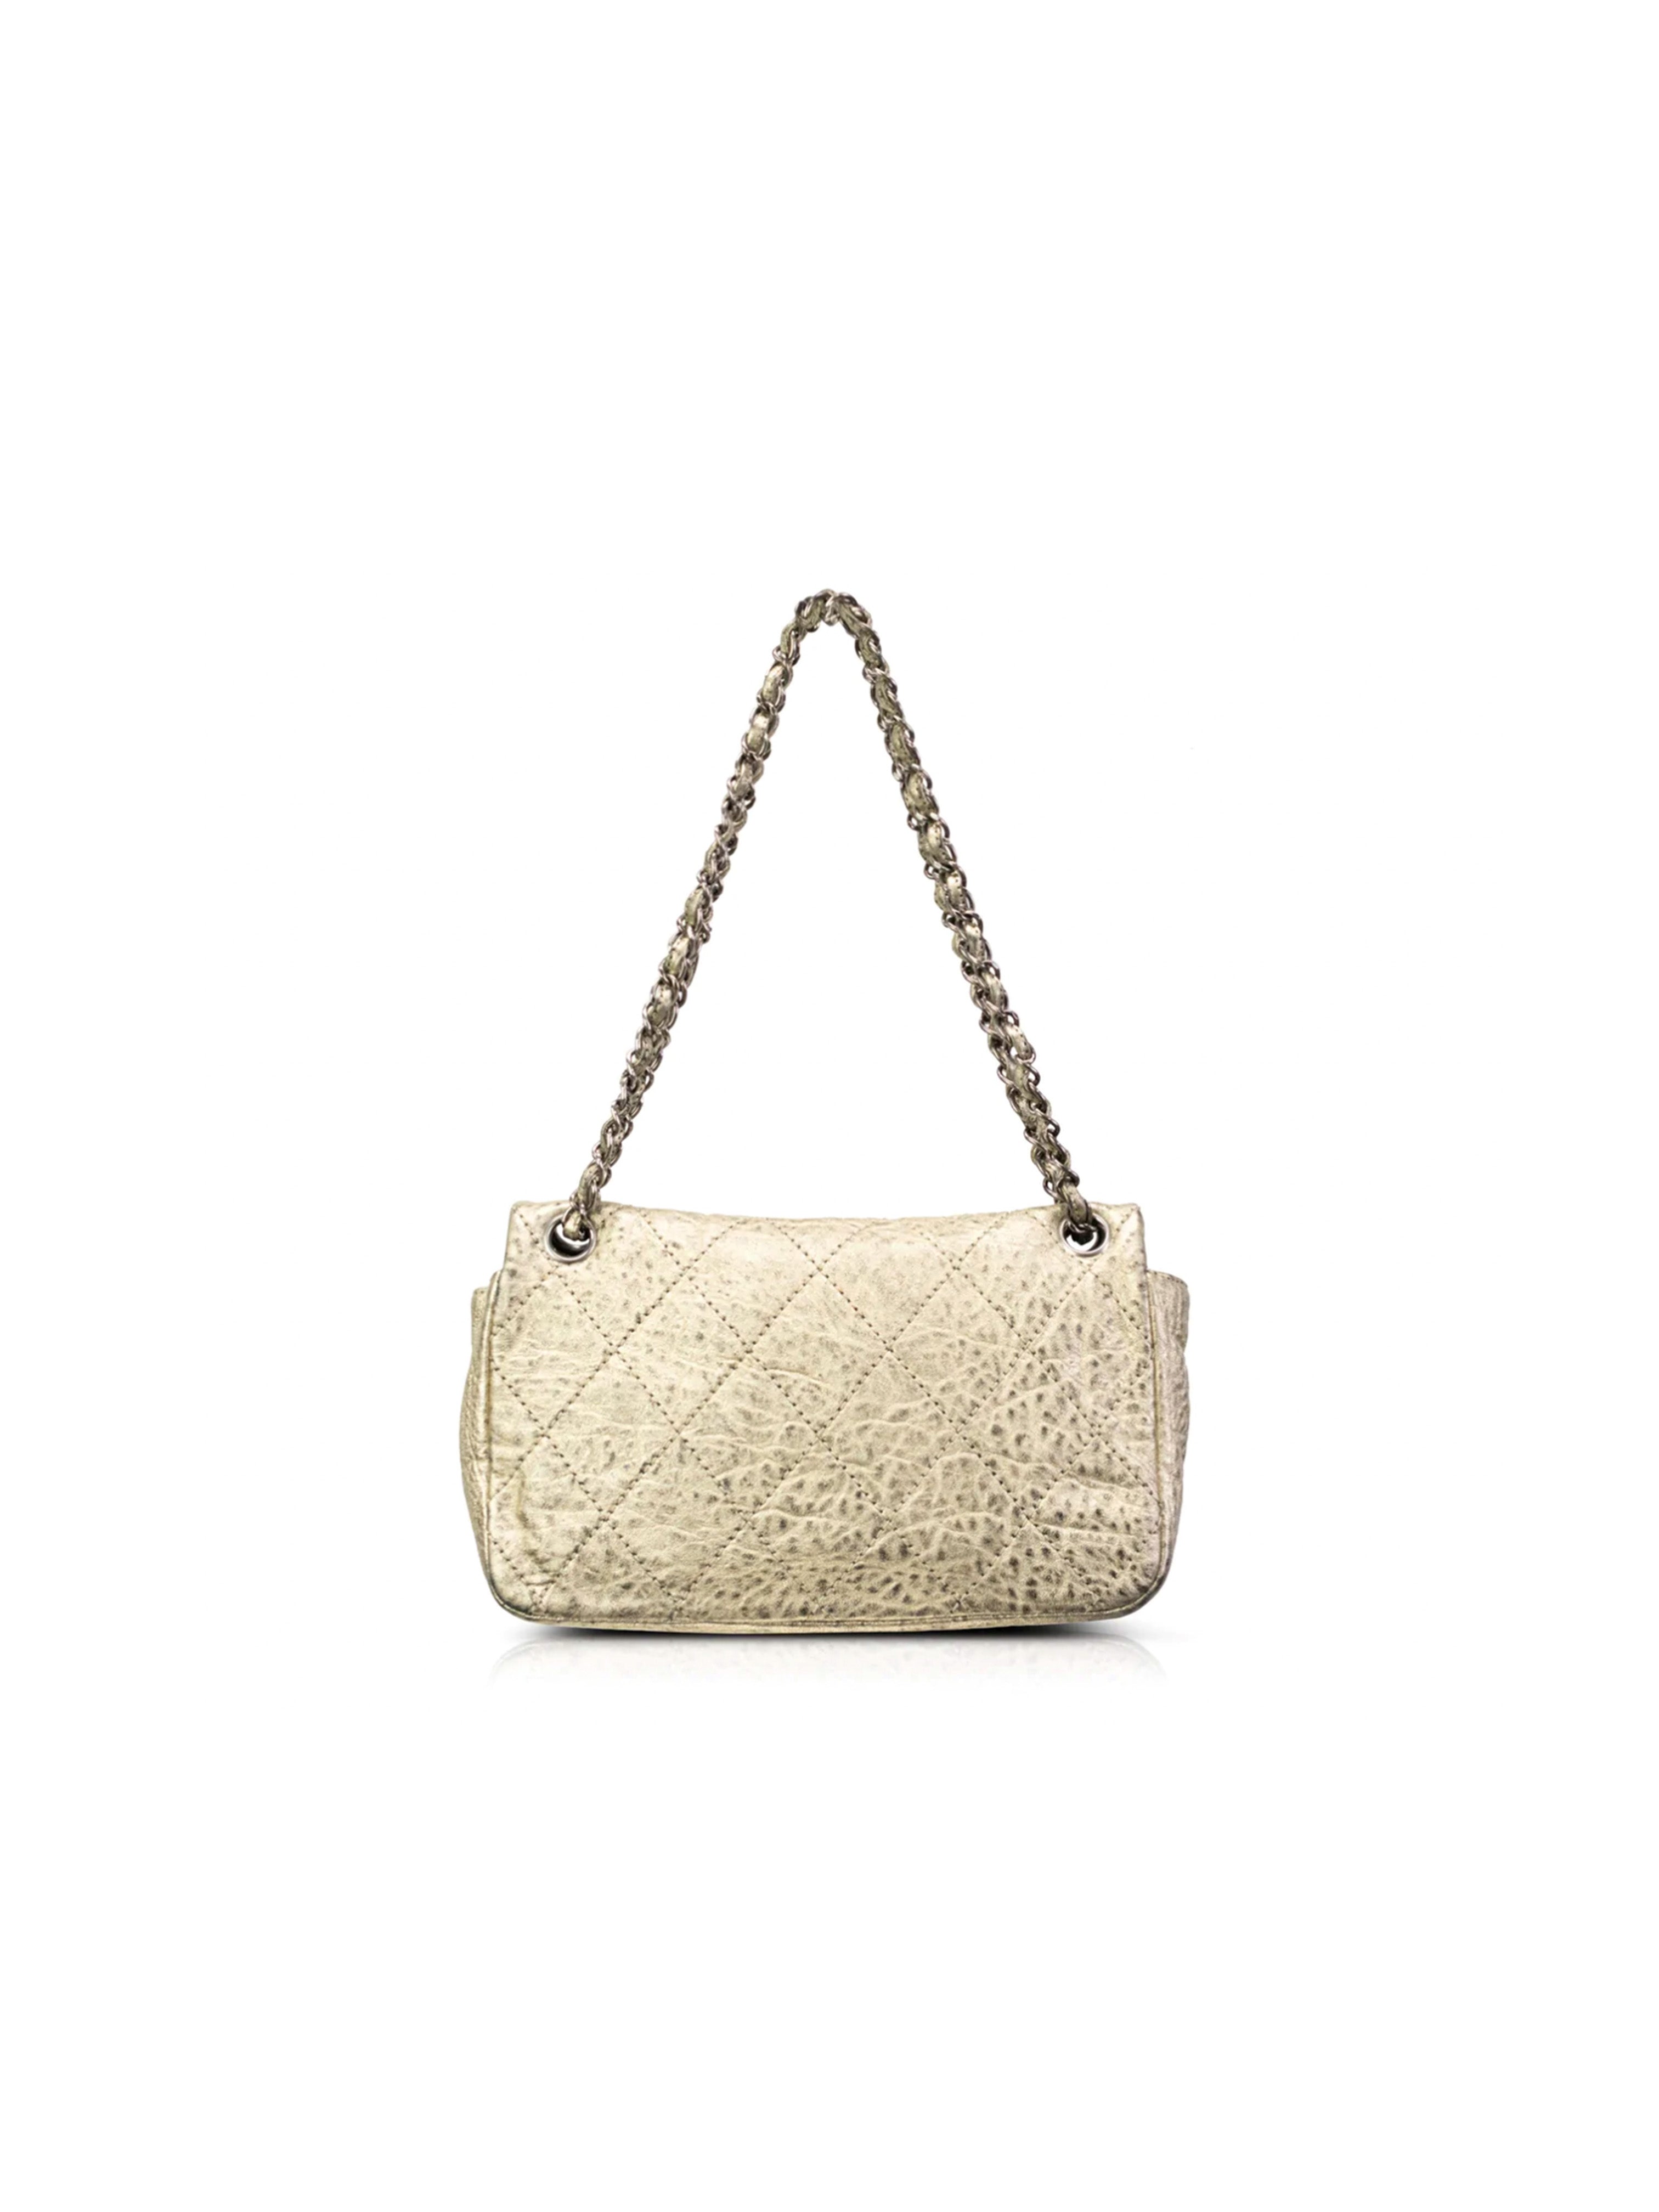 Vintage CHANEL Gold Metallic Snakeskin Leather and Crochet 